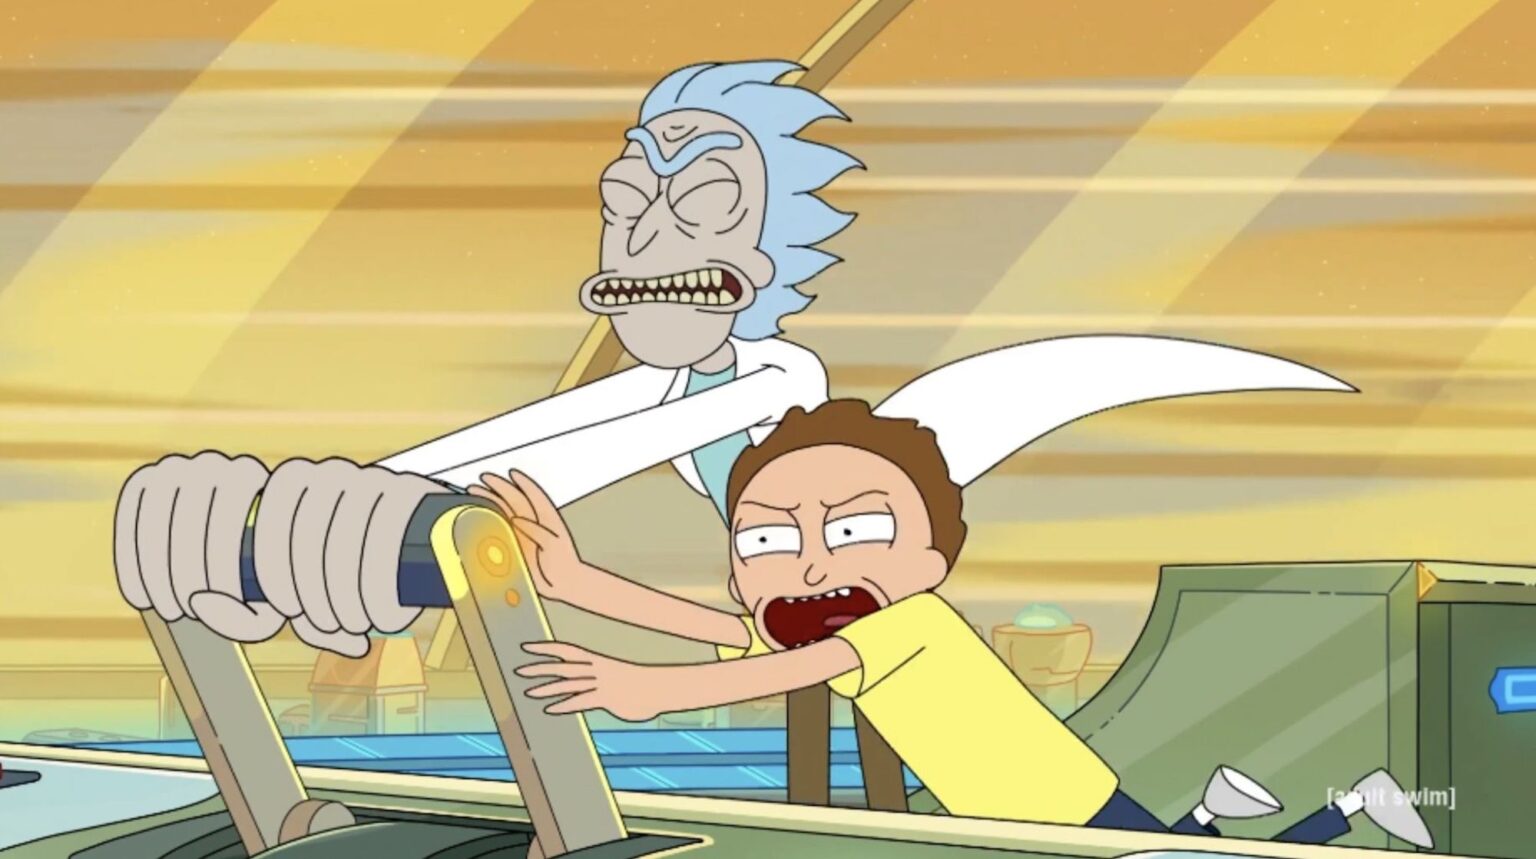 Need to catch up on the new episodes of 'Rick and Morty'? Find out where you can stream the show and some other Adult Swim series you need to check out!